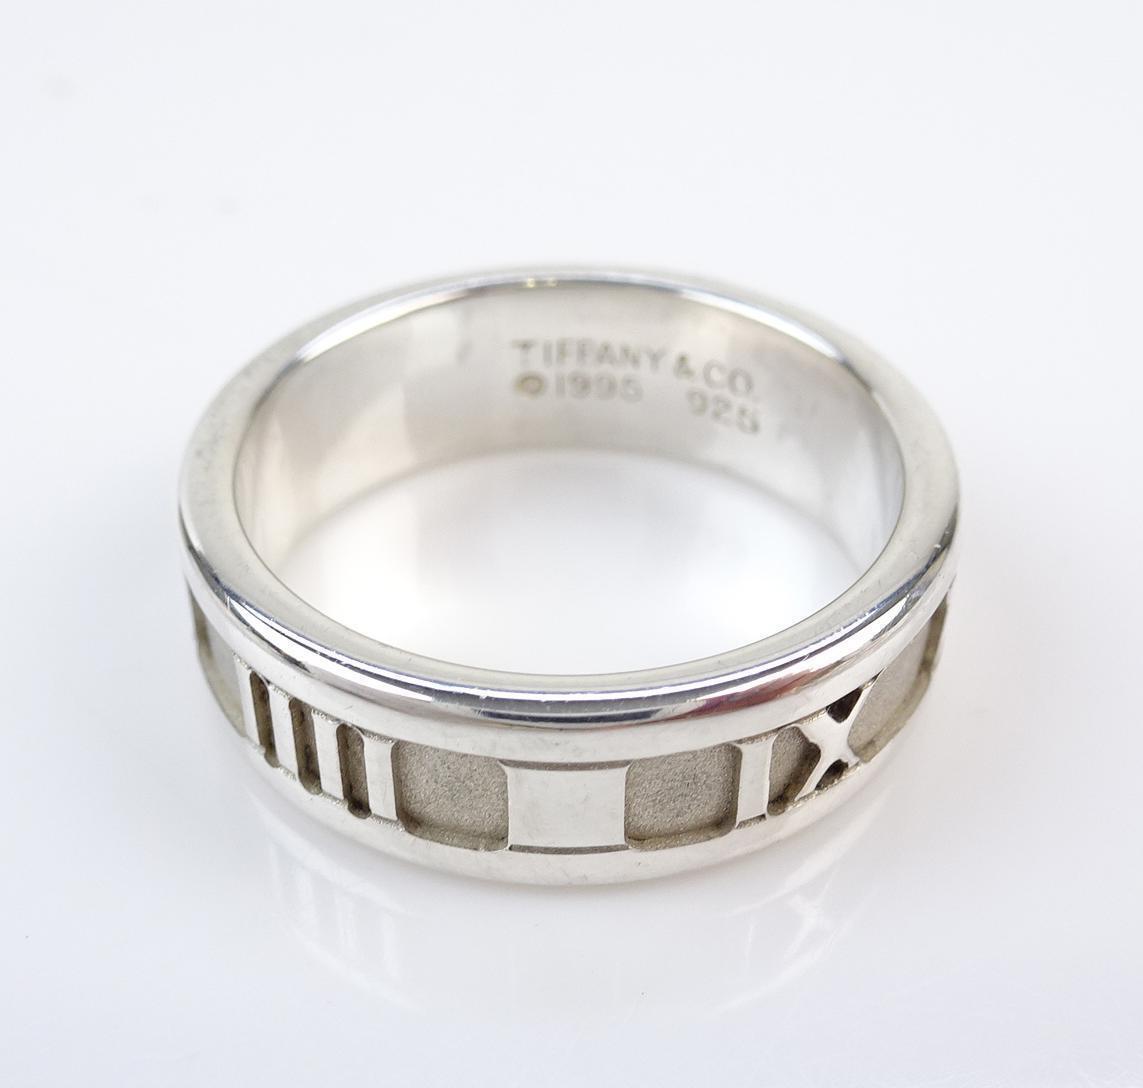 Tiffany & Co. Men's Authentic Atlas Sterling Silver Roman Numeral Ring